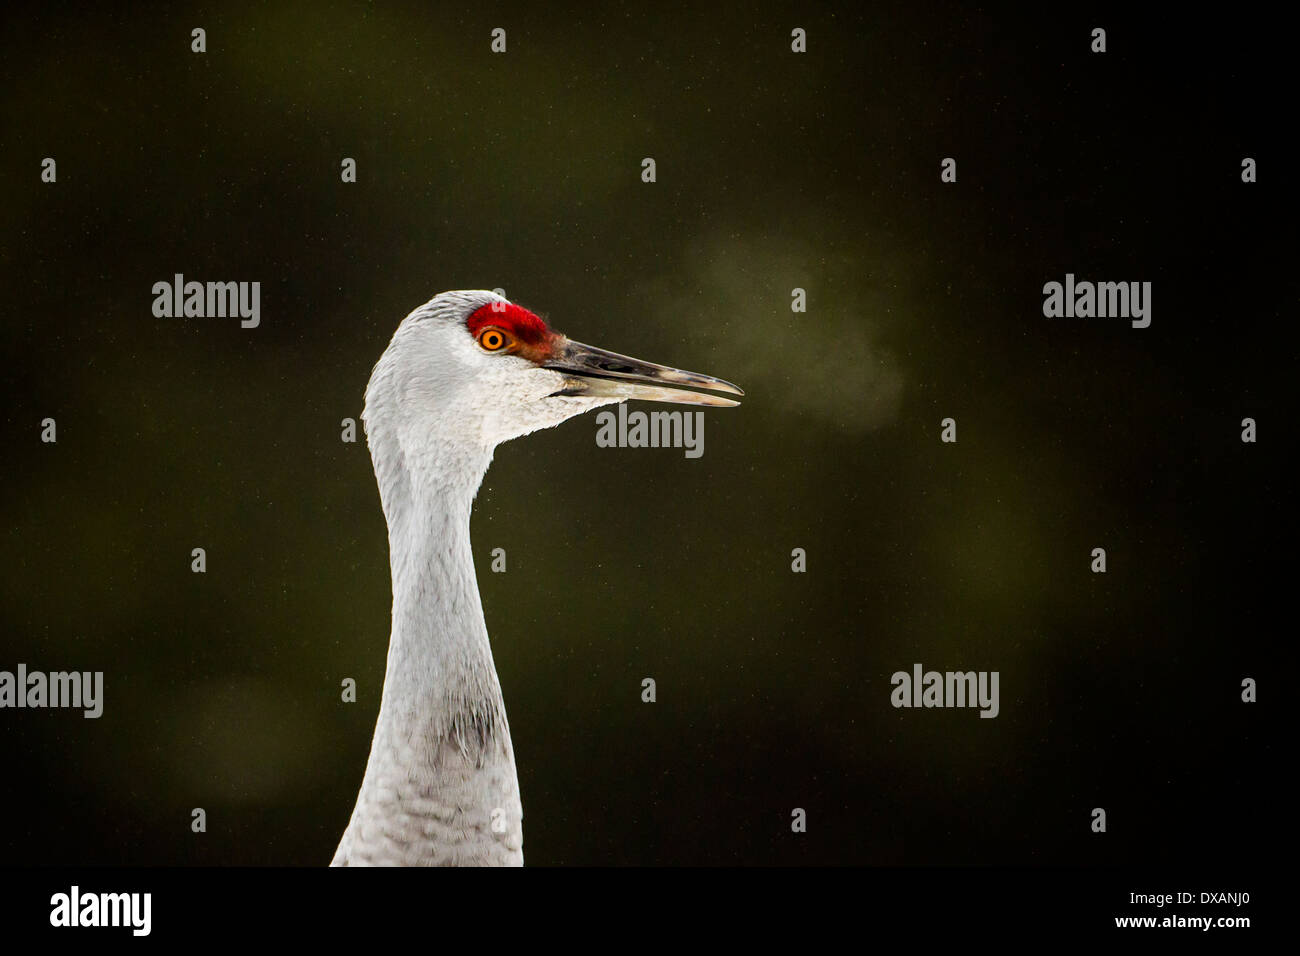 'Exhalation' of a Sandhill Crane in the Reifel Sanctuary south of Vancouver, British Columbia Stock Photo